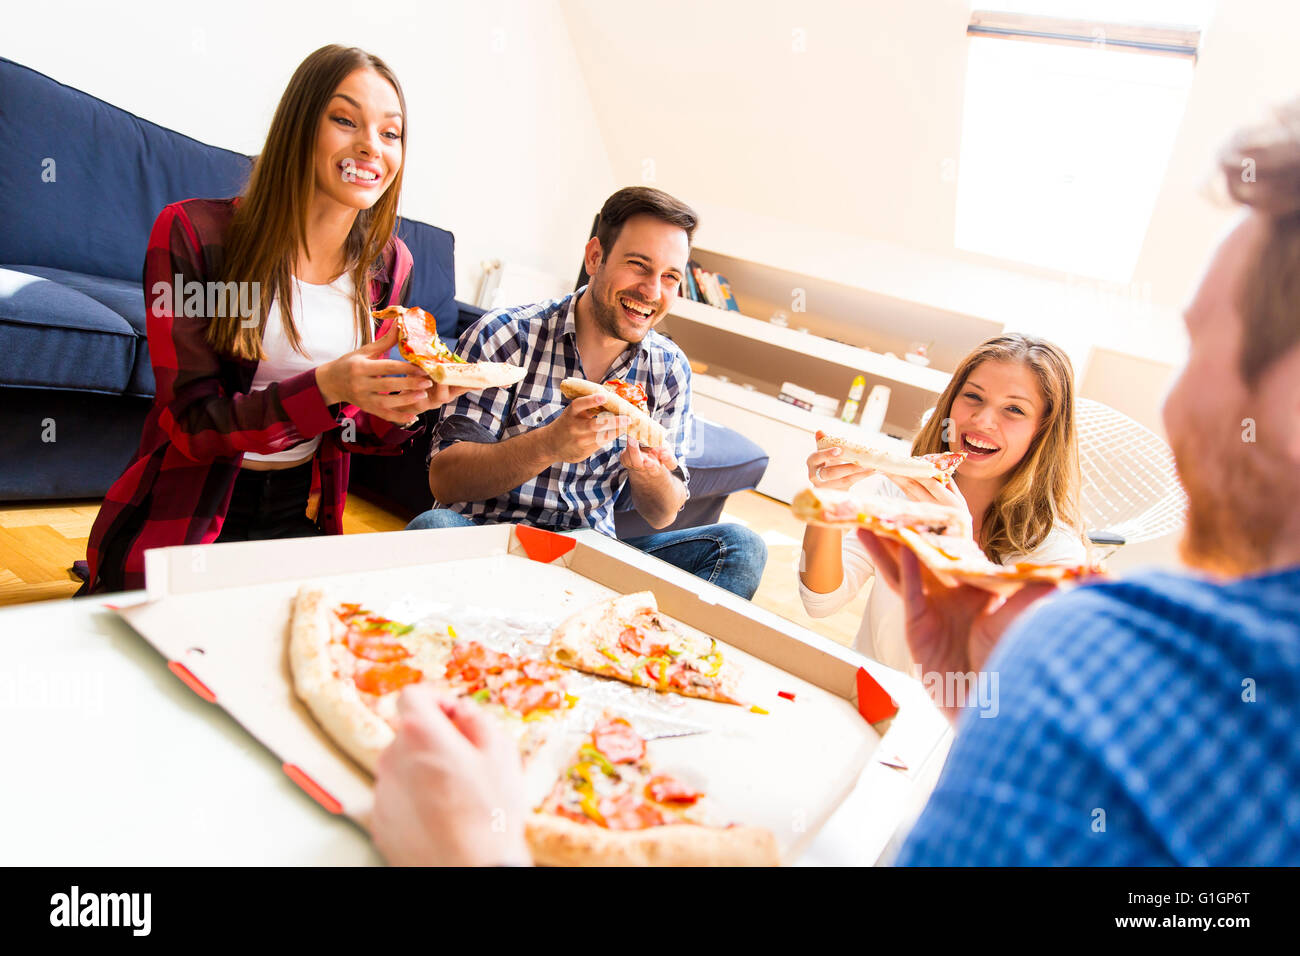 Eating Pizza. Friends Image & Photo (Free Trial)